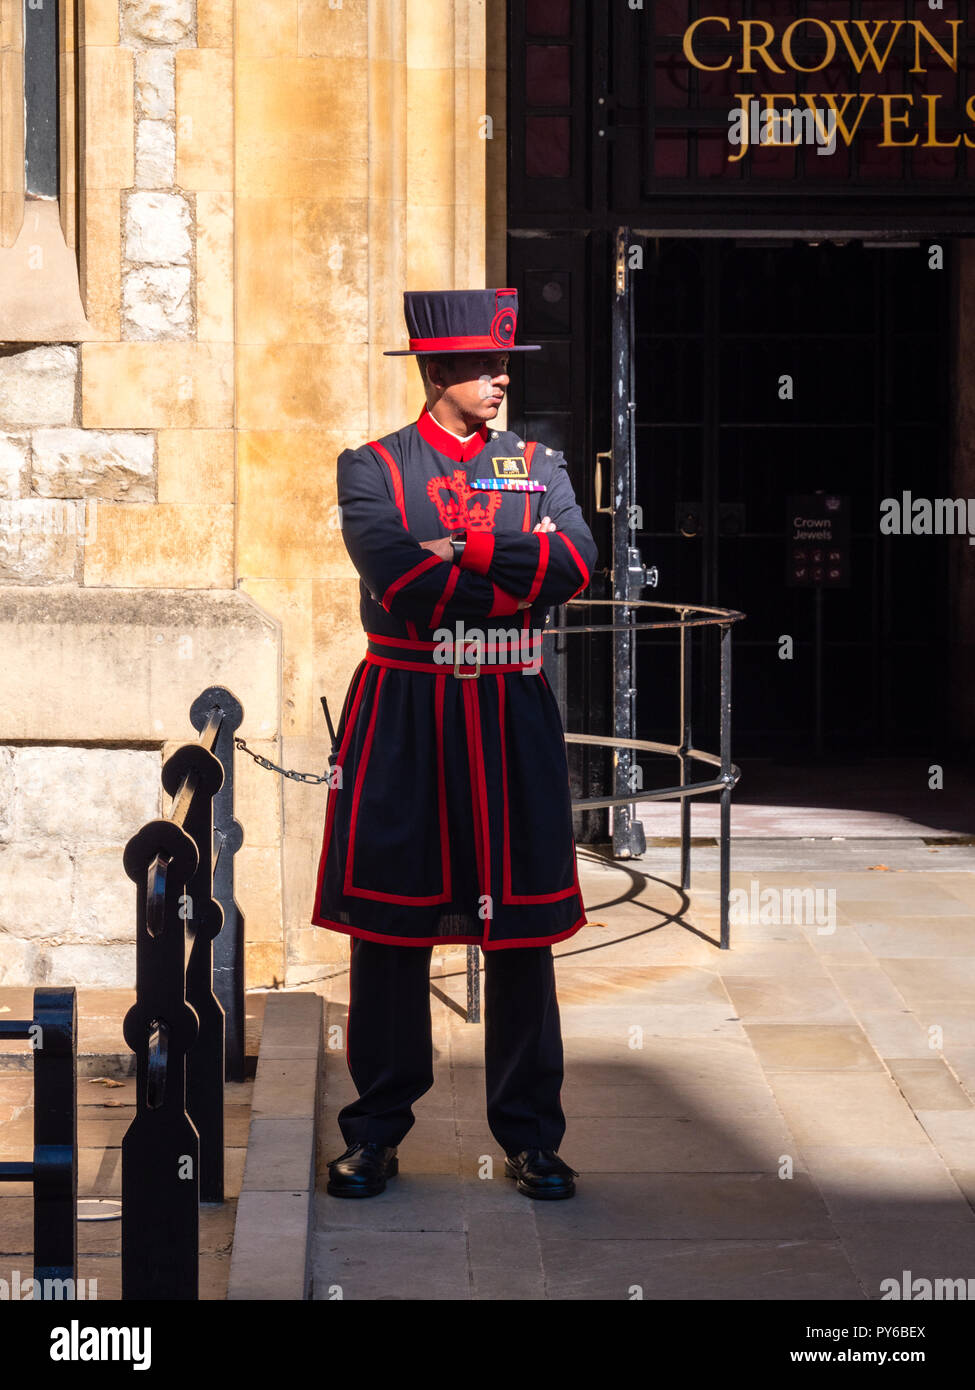 Beefeater, Standing Guard, Outside The Crown Jewels, Waterloo Block, Tower of London, England, UK, GB. Stock Photo